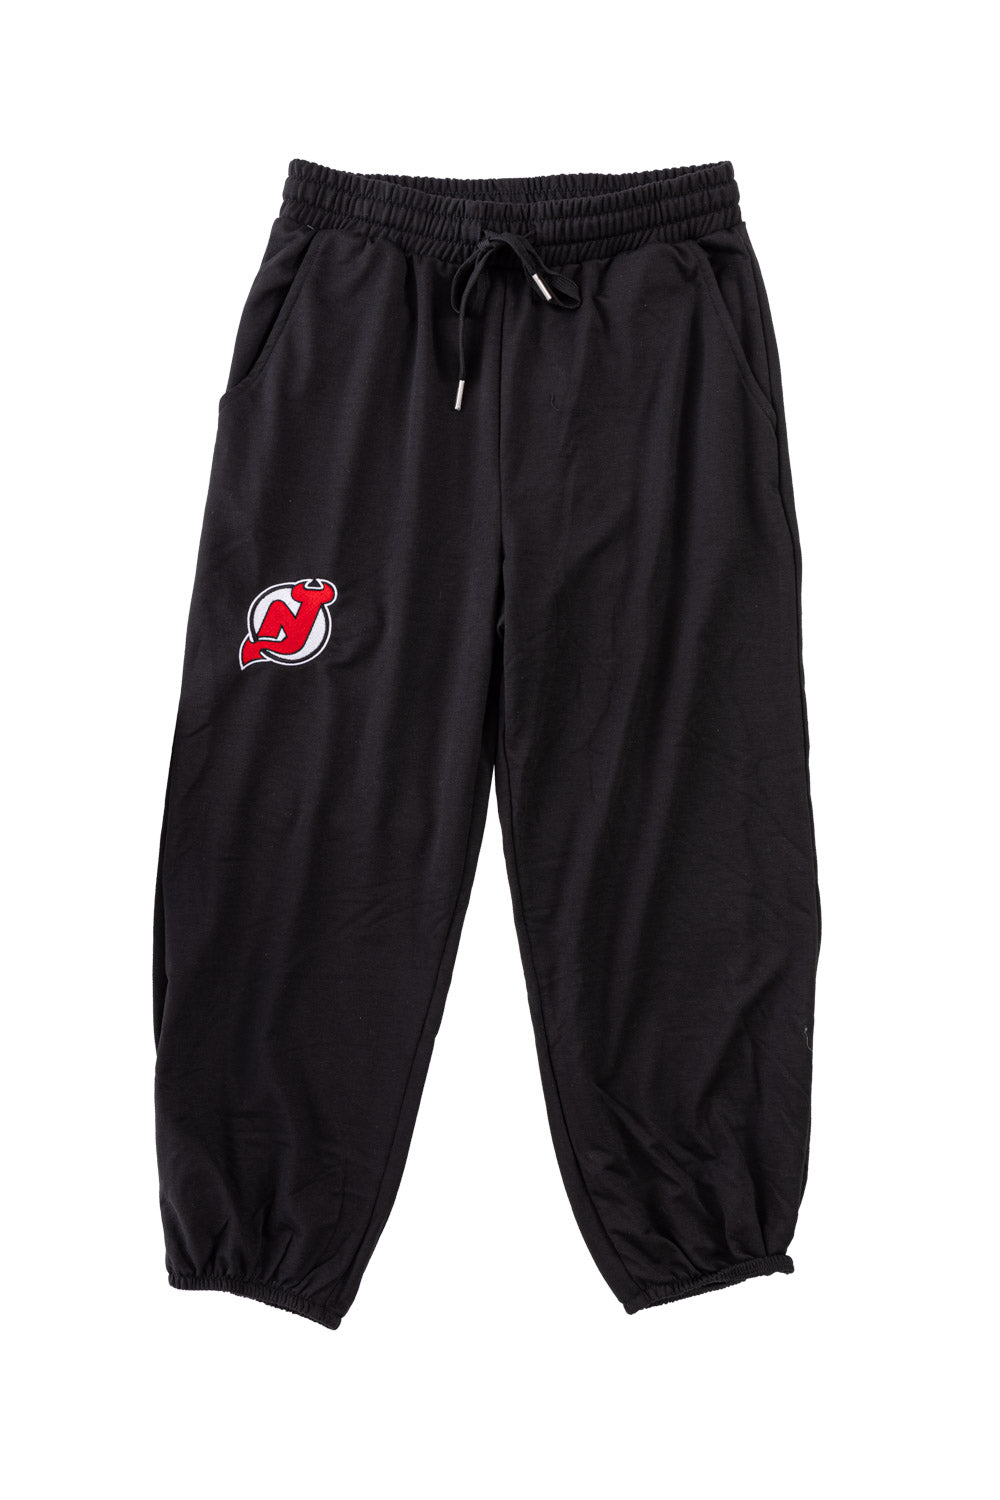 New Jersey Devils Ladies Cropped Jogger Style Track Pants